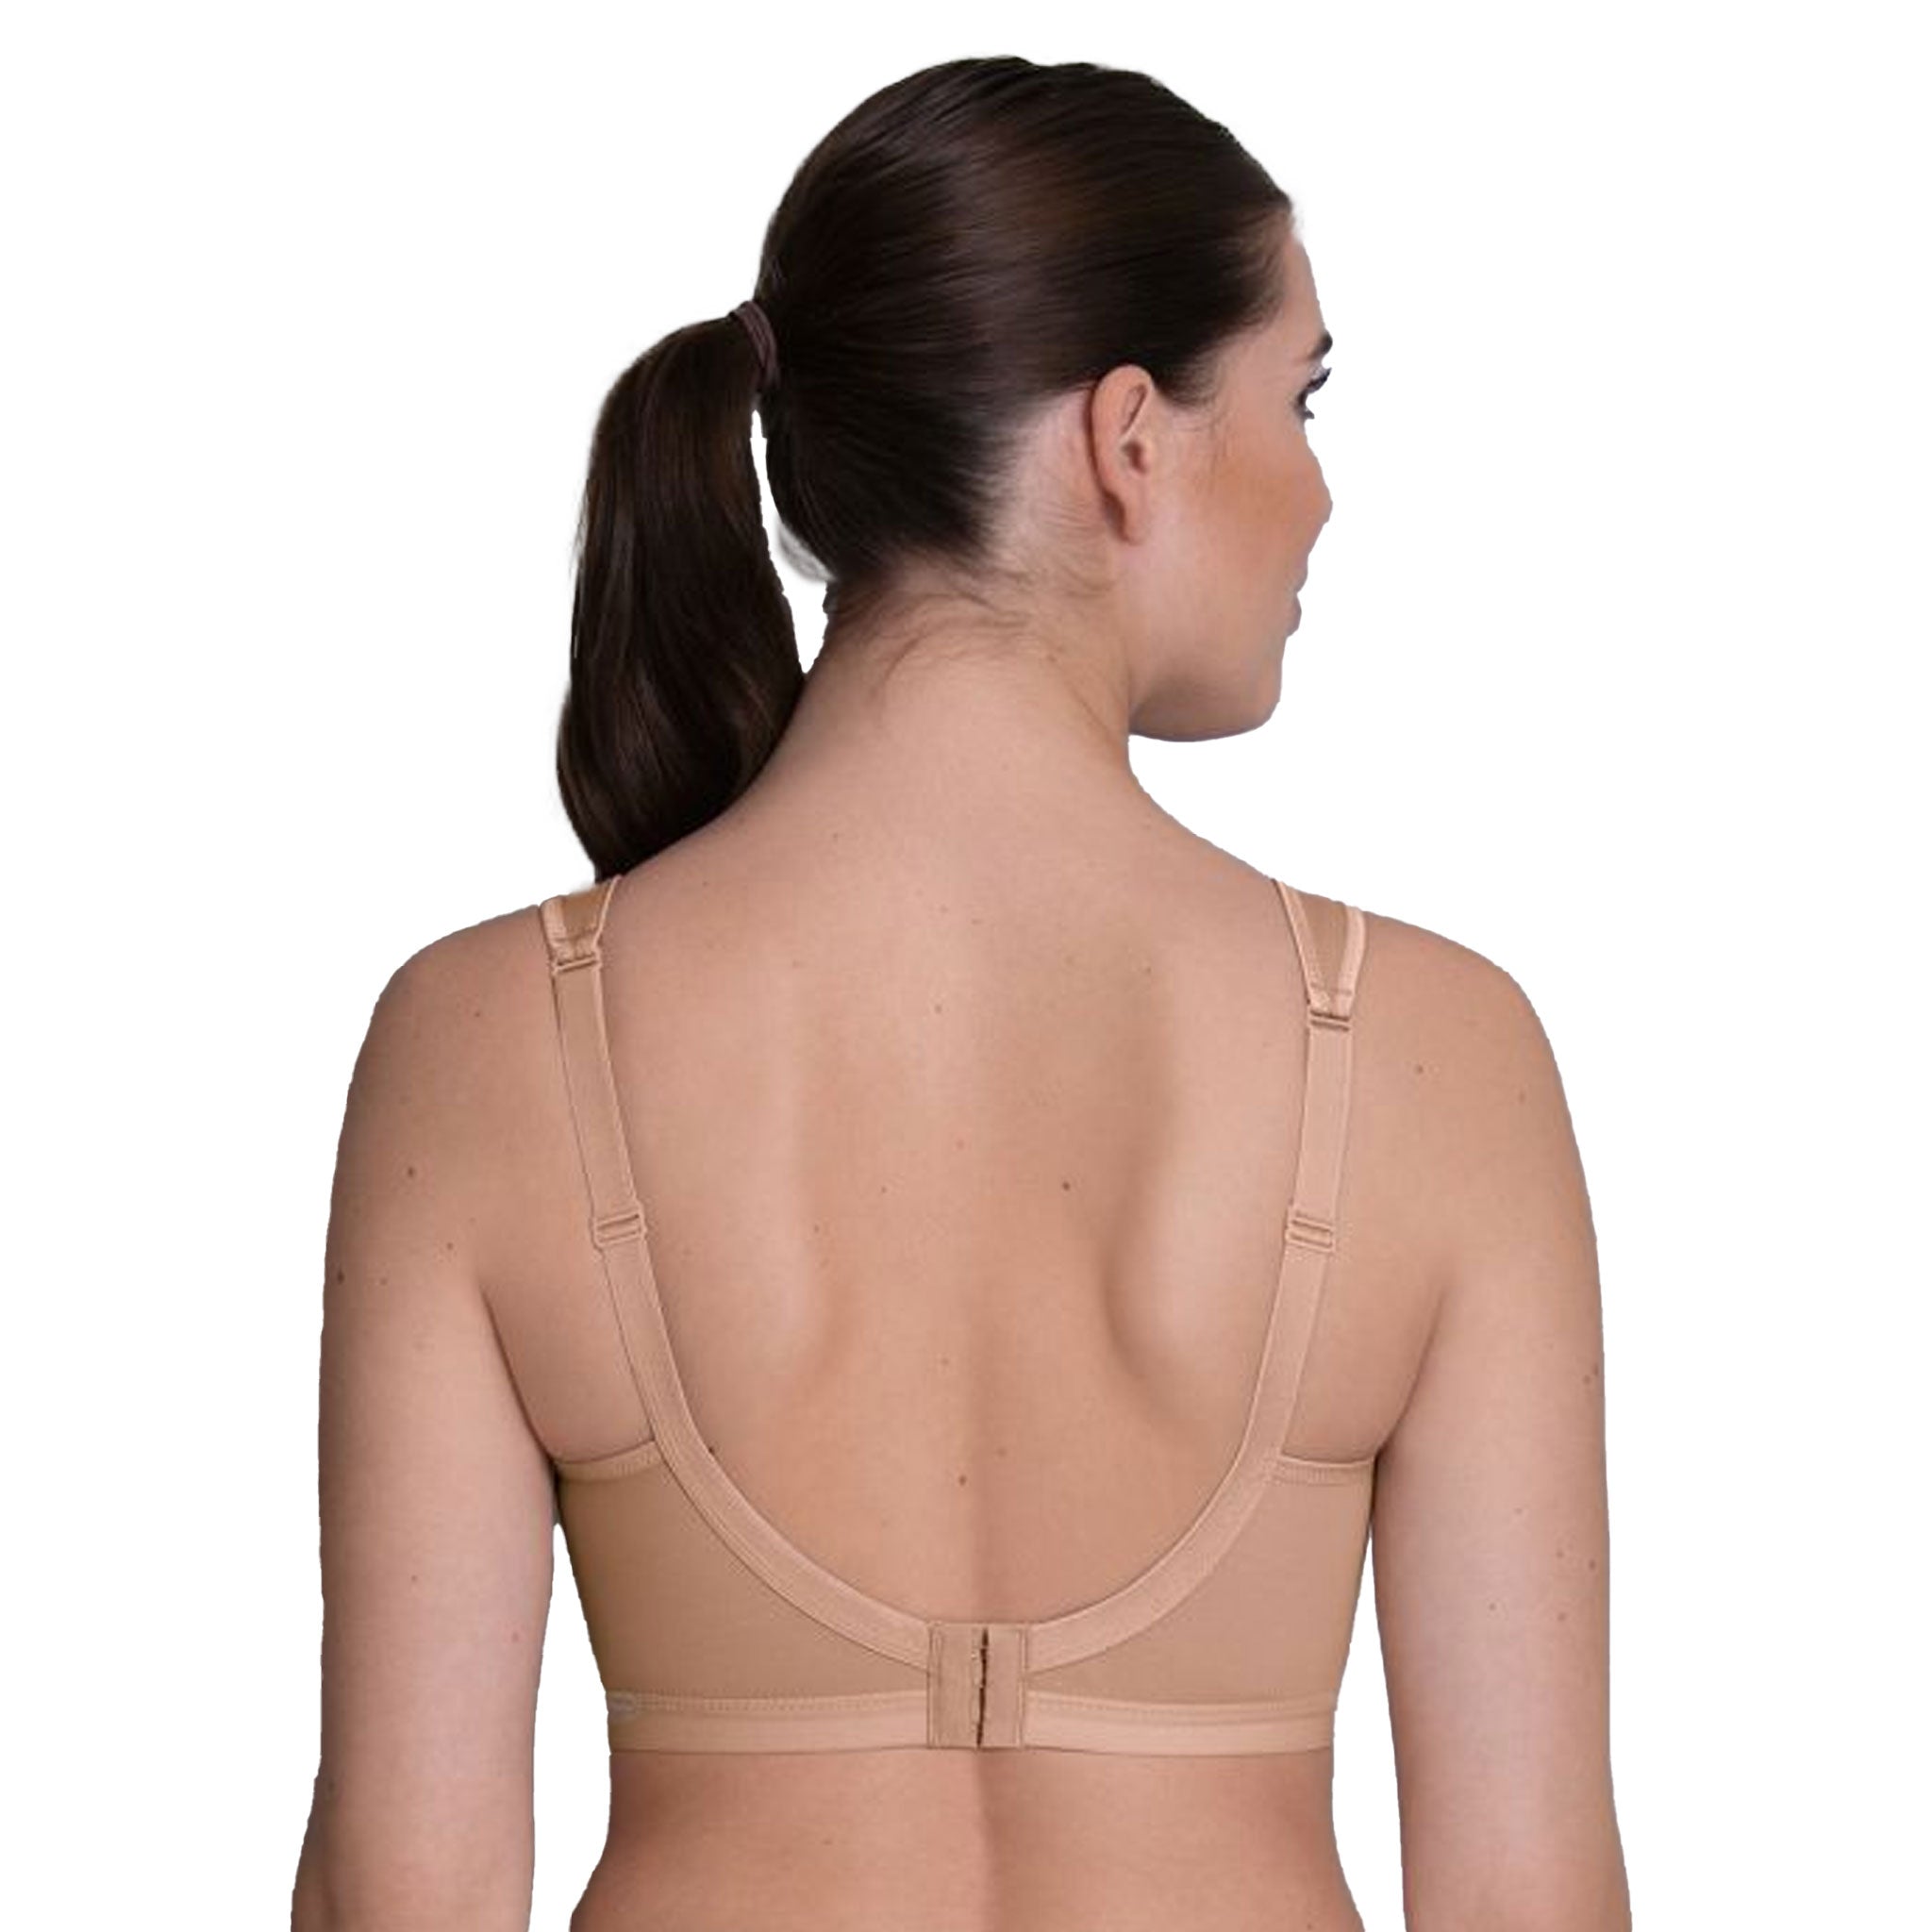 Anita Light and Firm Sports Bra in Sand – Ordinarily Active